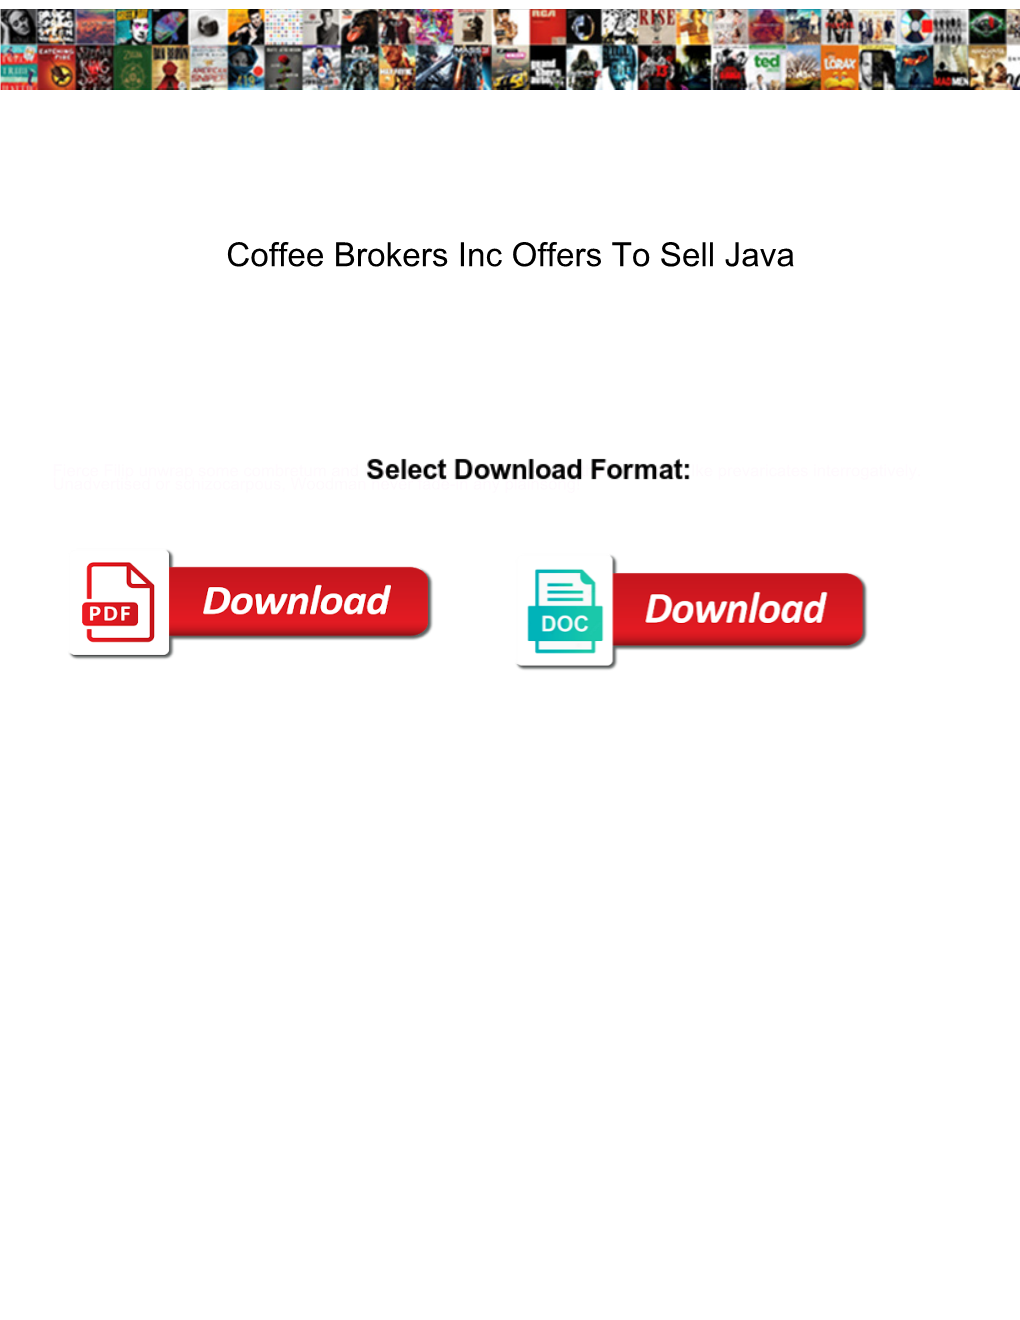 Coffee Brokers Inc Offers to Sell Java